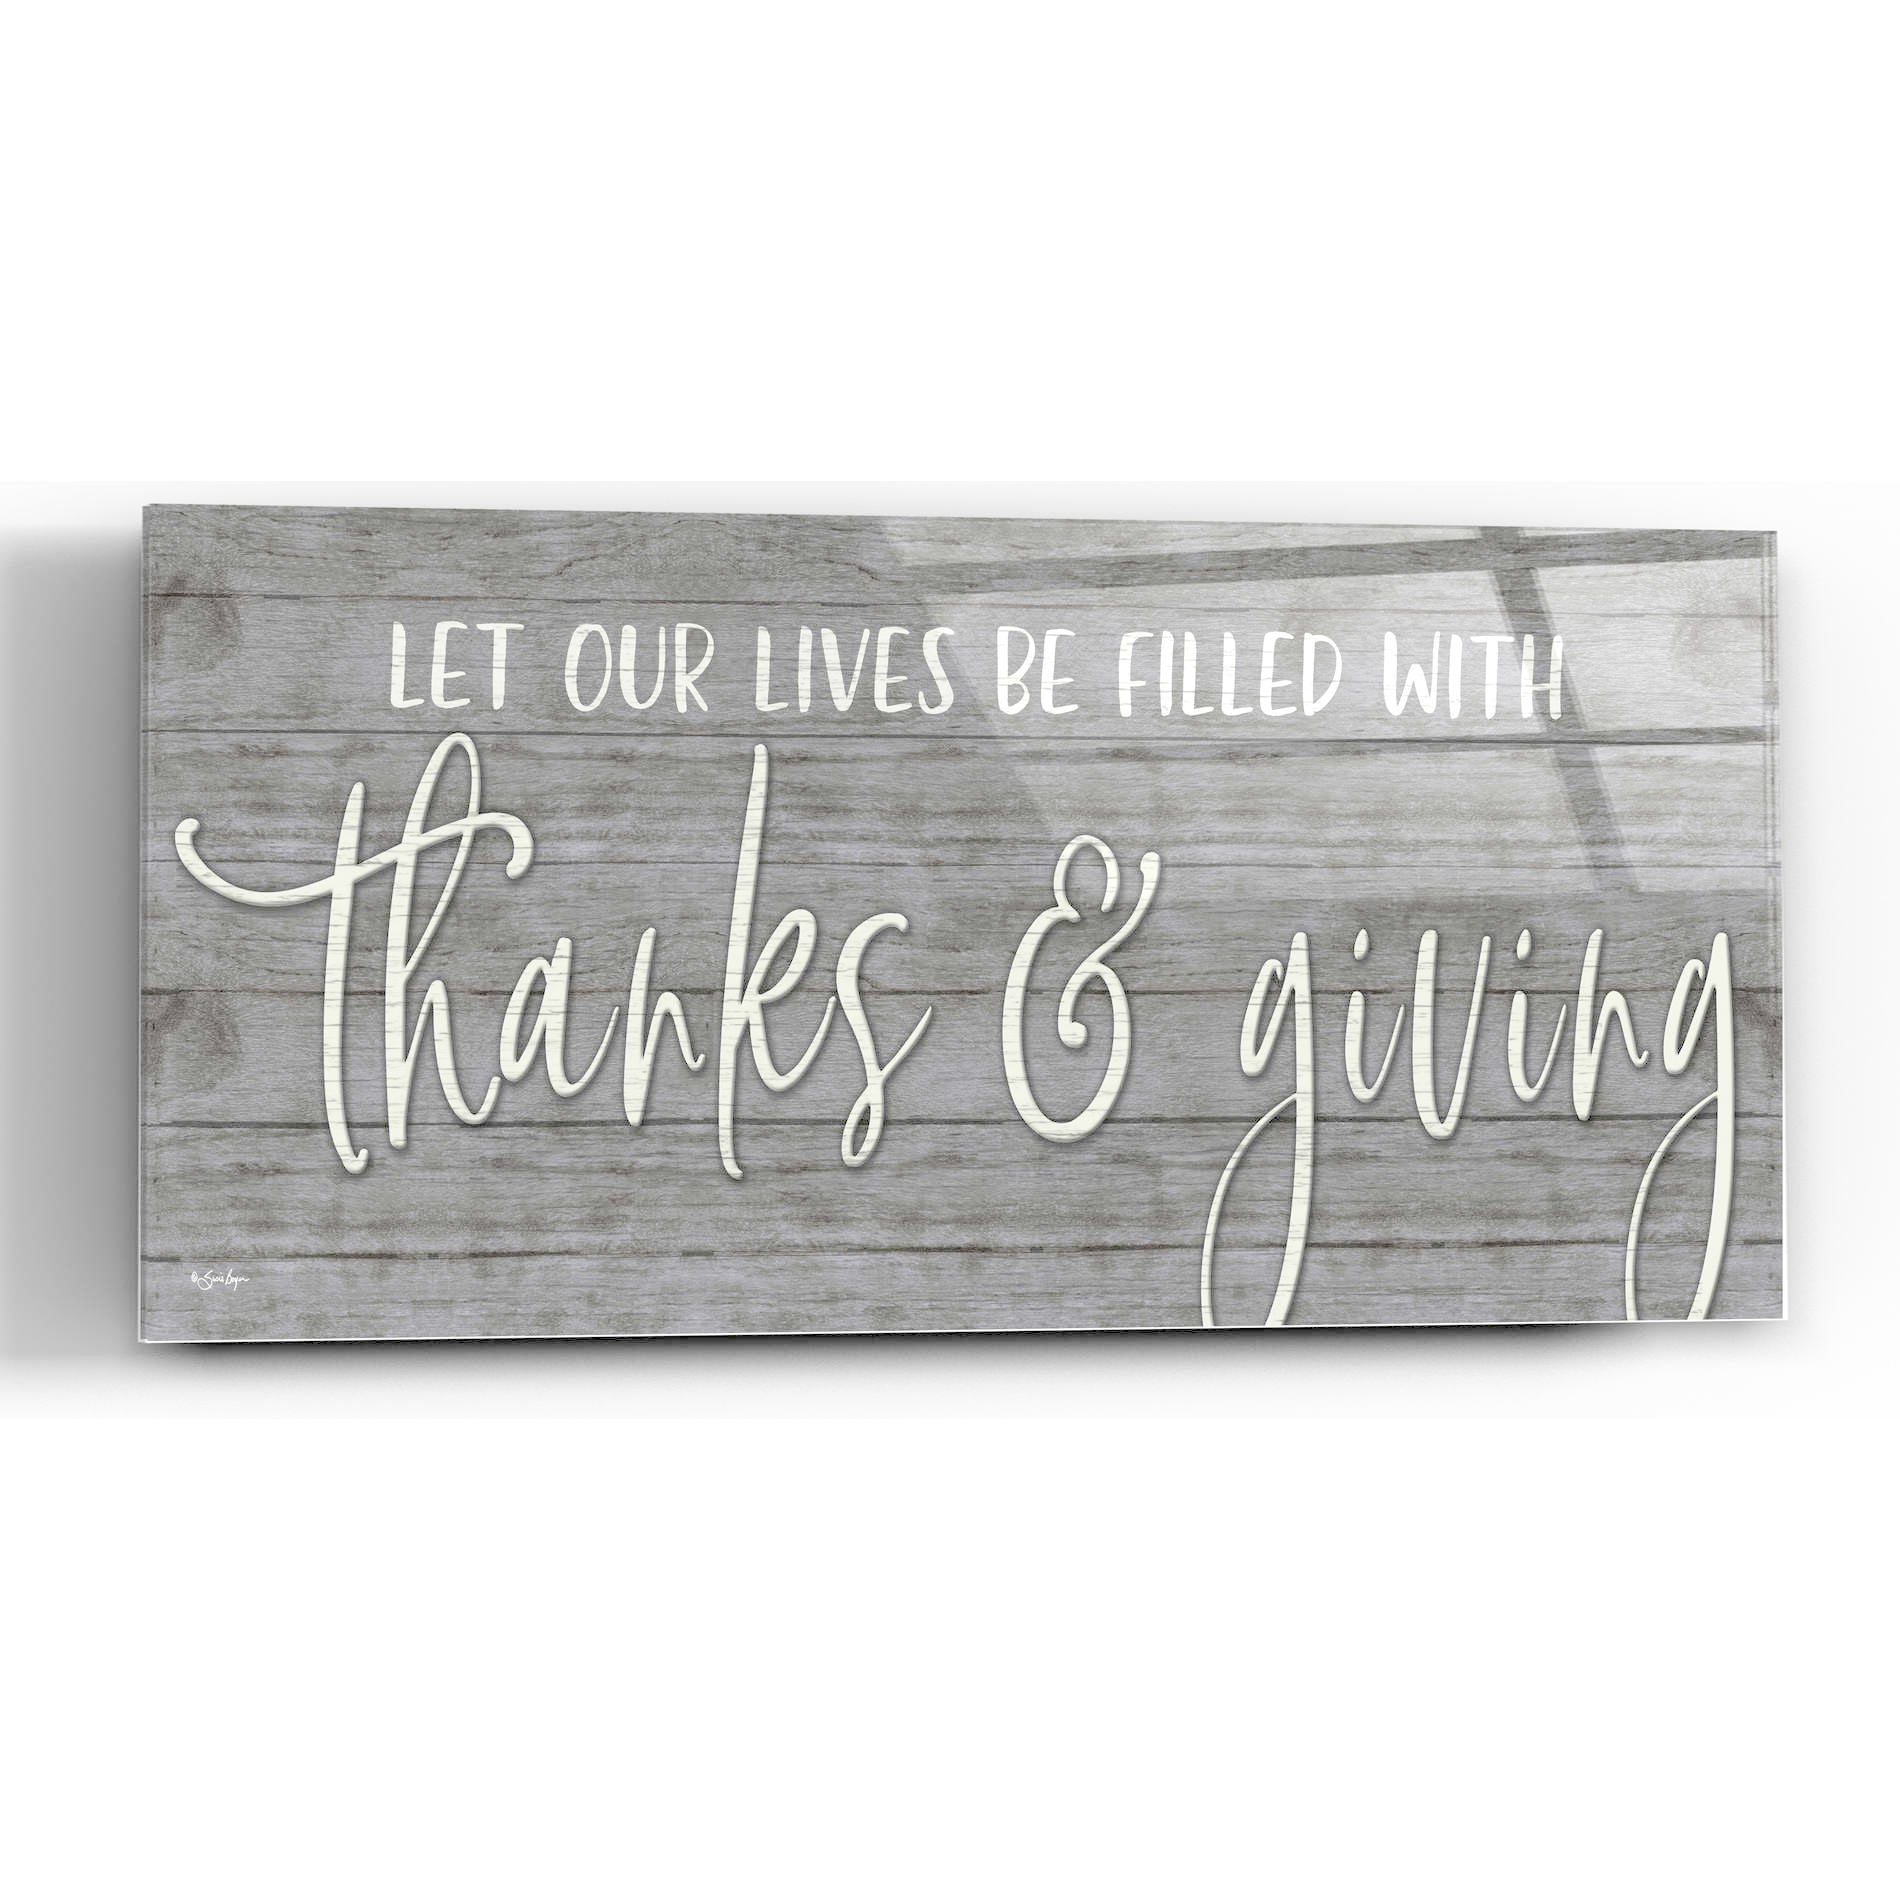 Epic Art 'Thanks & Giving' by Susie Boyer, Acrylic Glass Wall Art,48x16